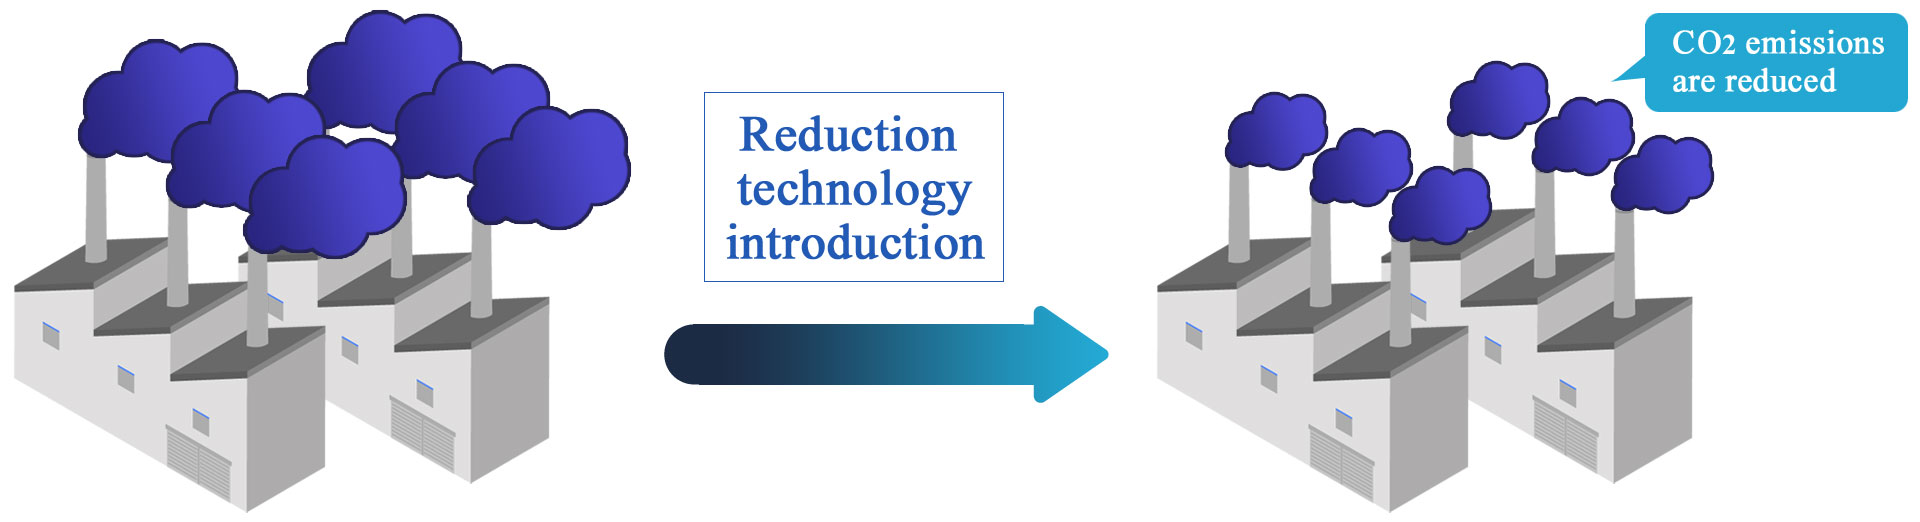 Reduction technology introduction